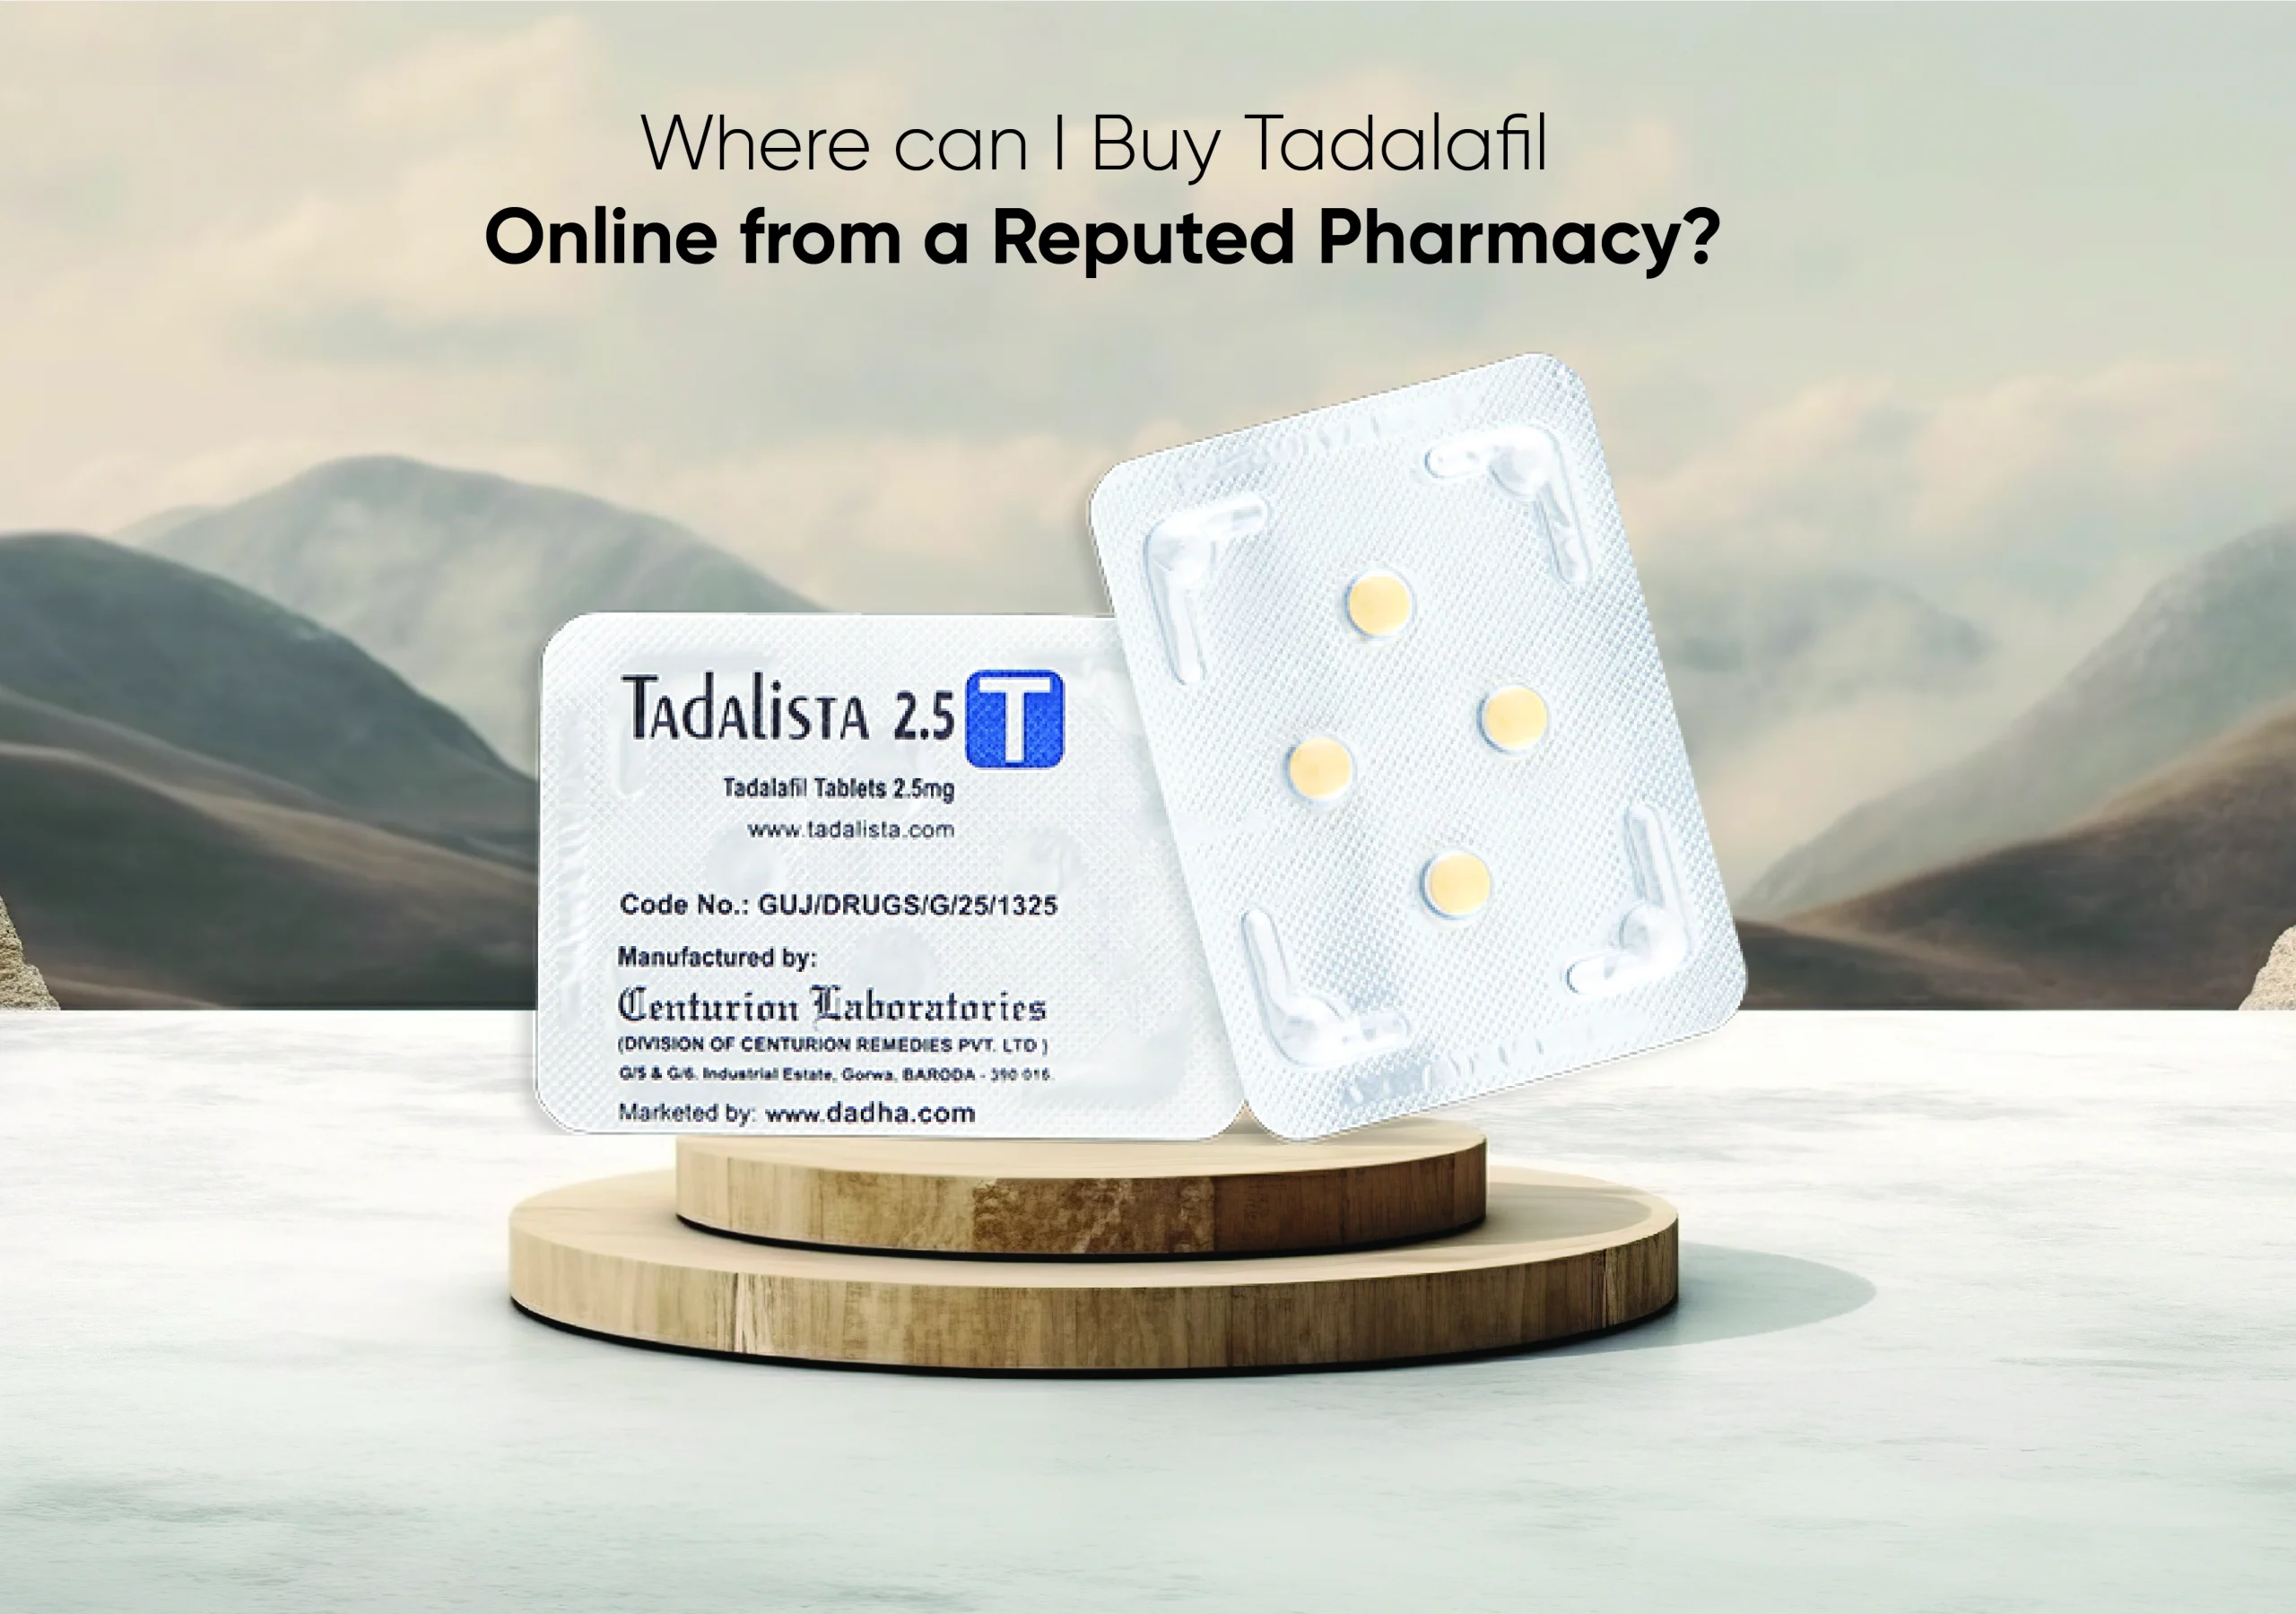 where-can-i-buy-tadalafil-online-from-a-reputed-pharmacy?